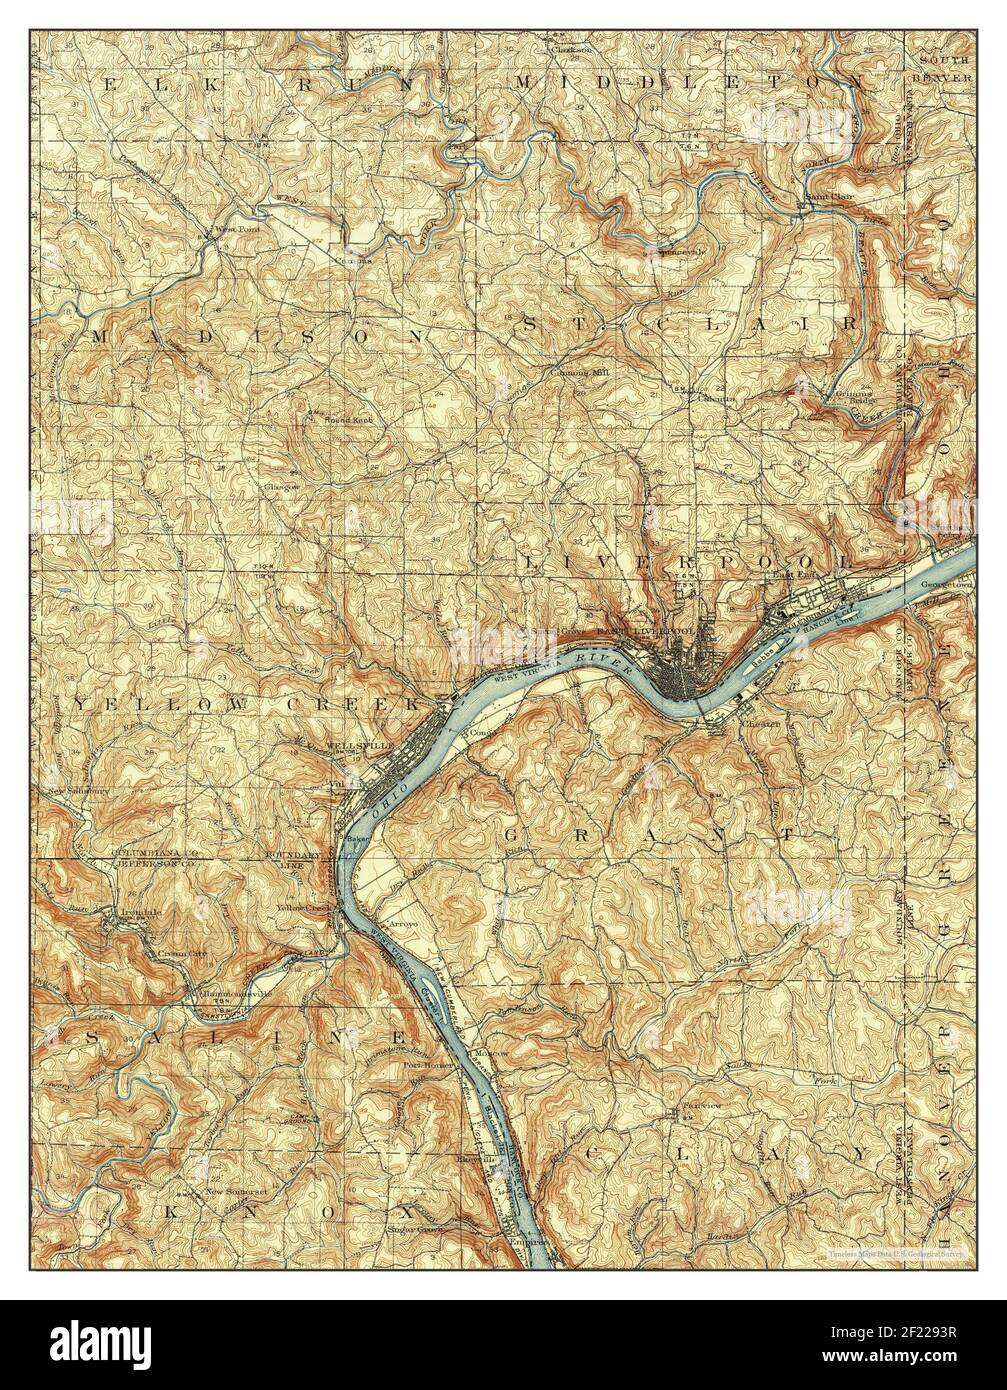 Wellsville, West Virginia, map 1904, 1:62500, United States of America by Timeless Maps, data U.S. Geological Survey Stock Photo